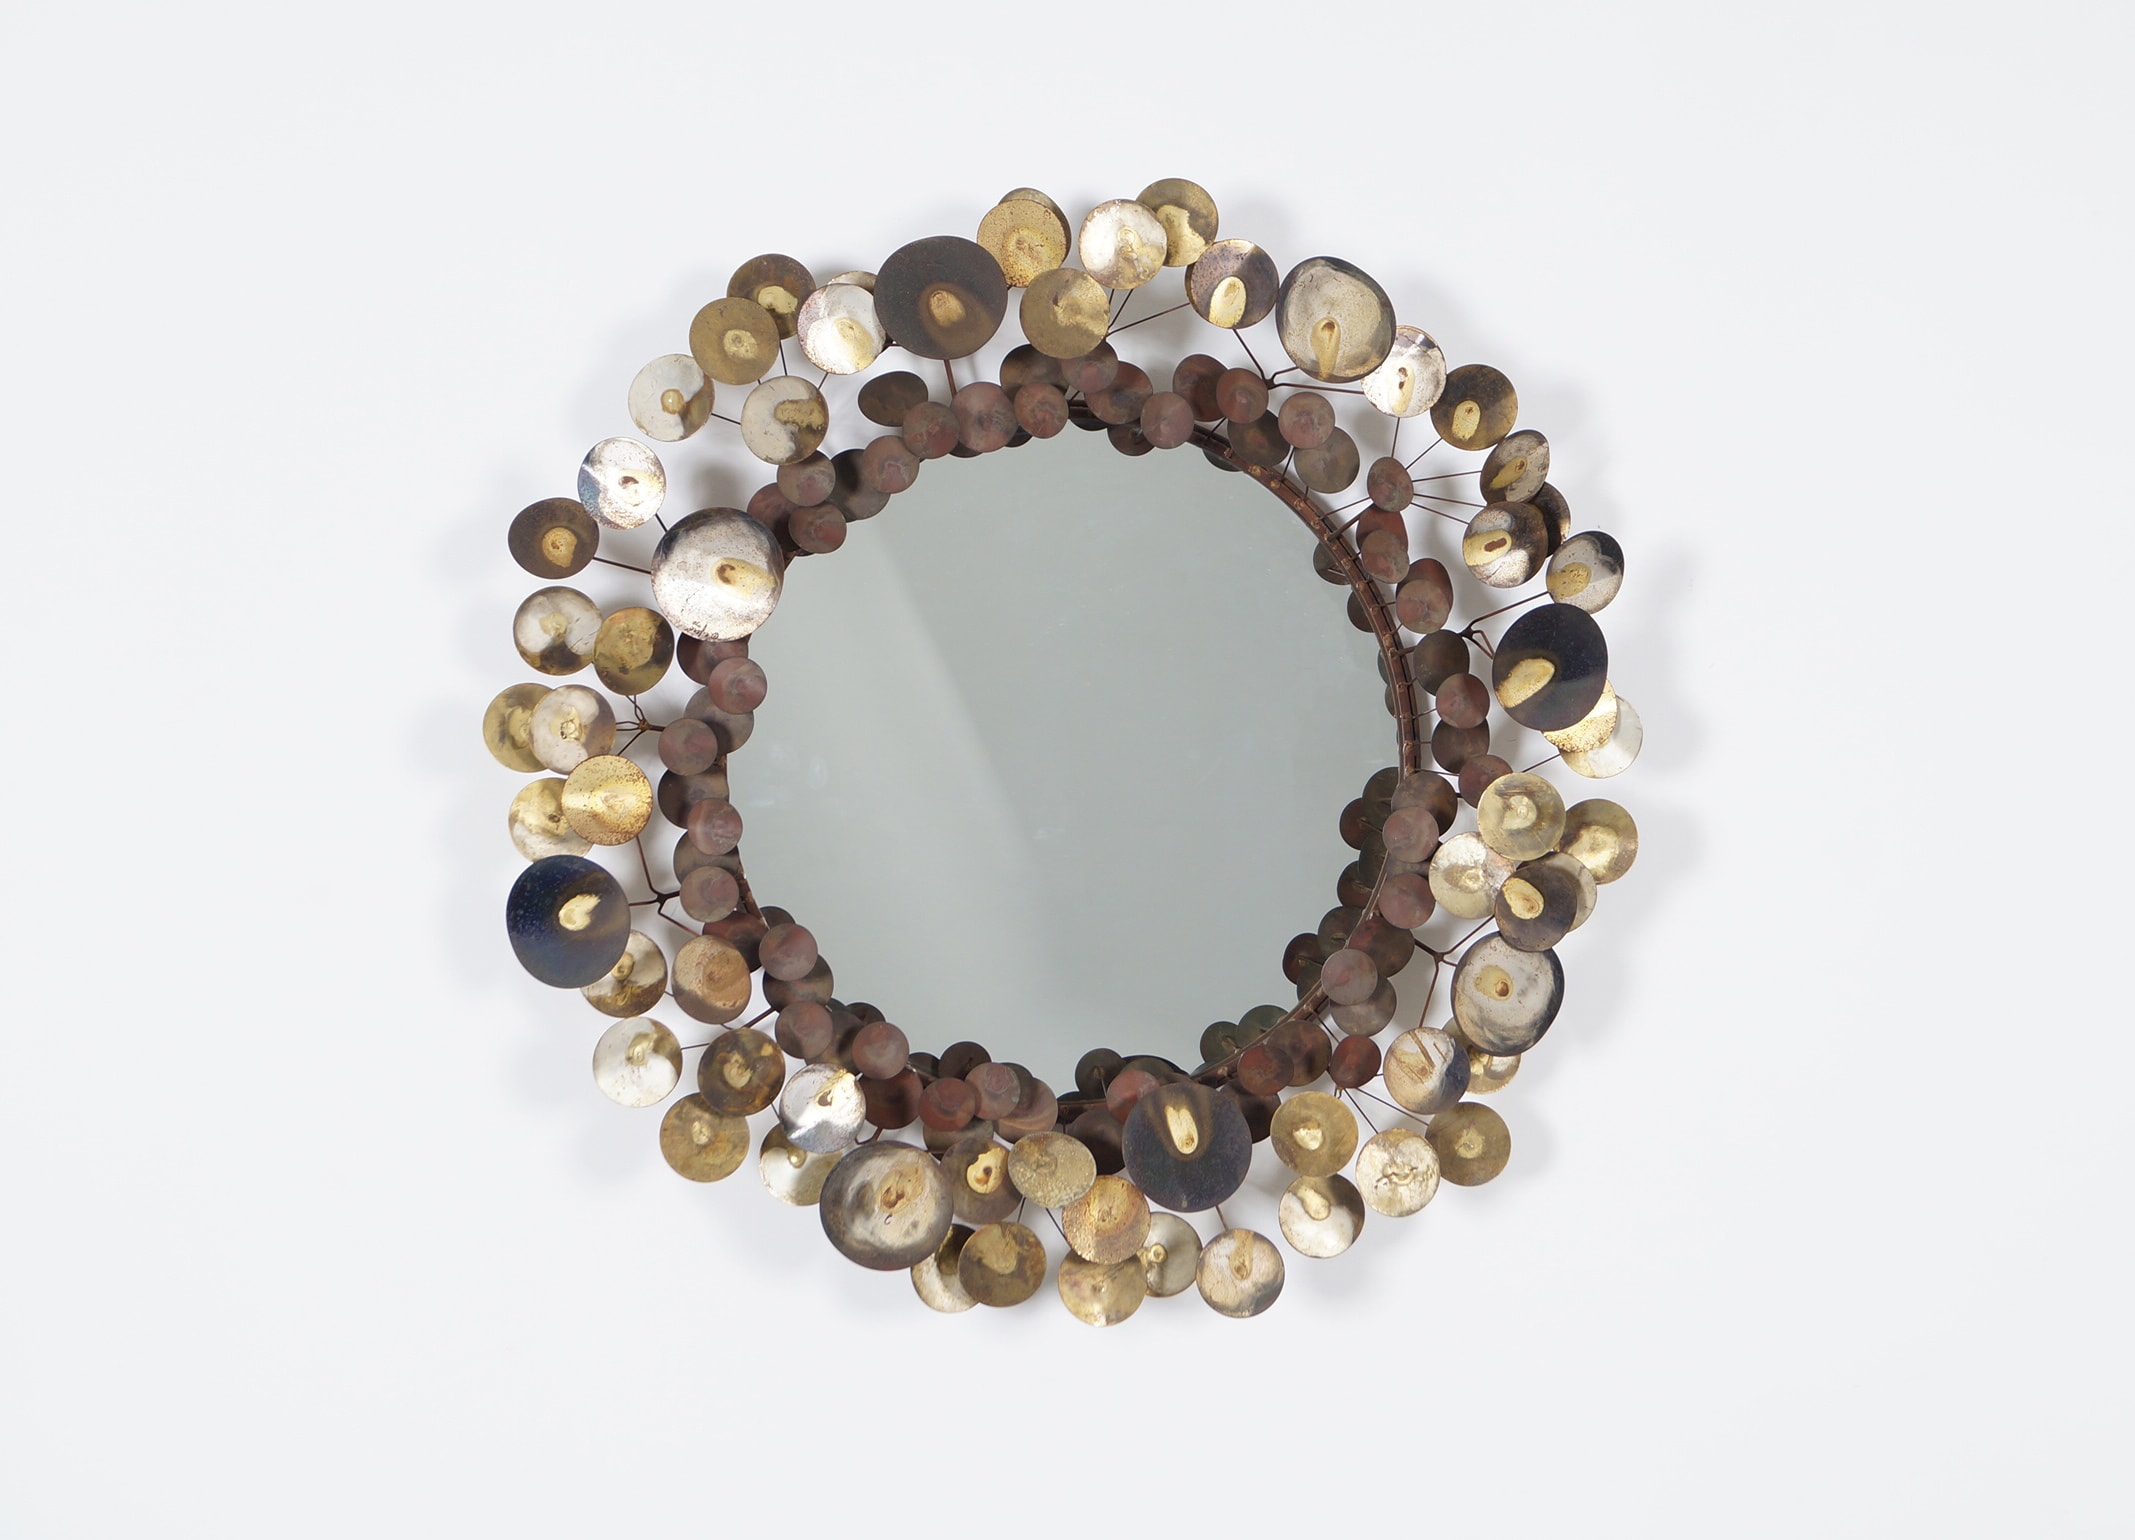 Vintage Raindrops Wall Mirror by Curtis Jere